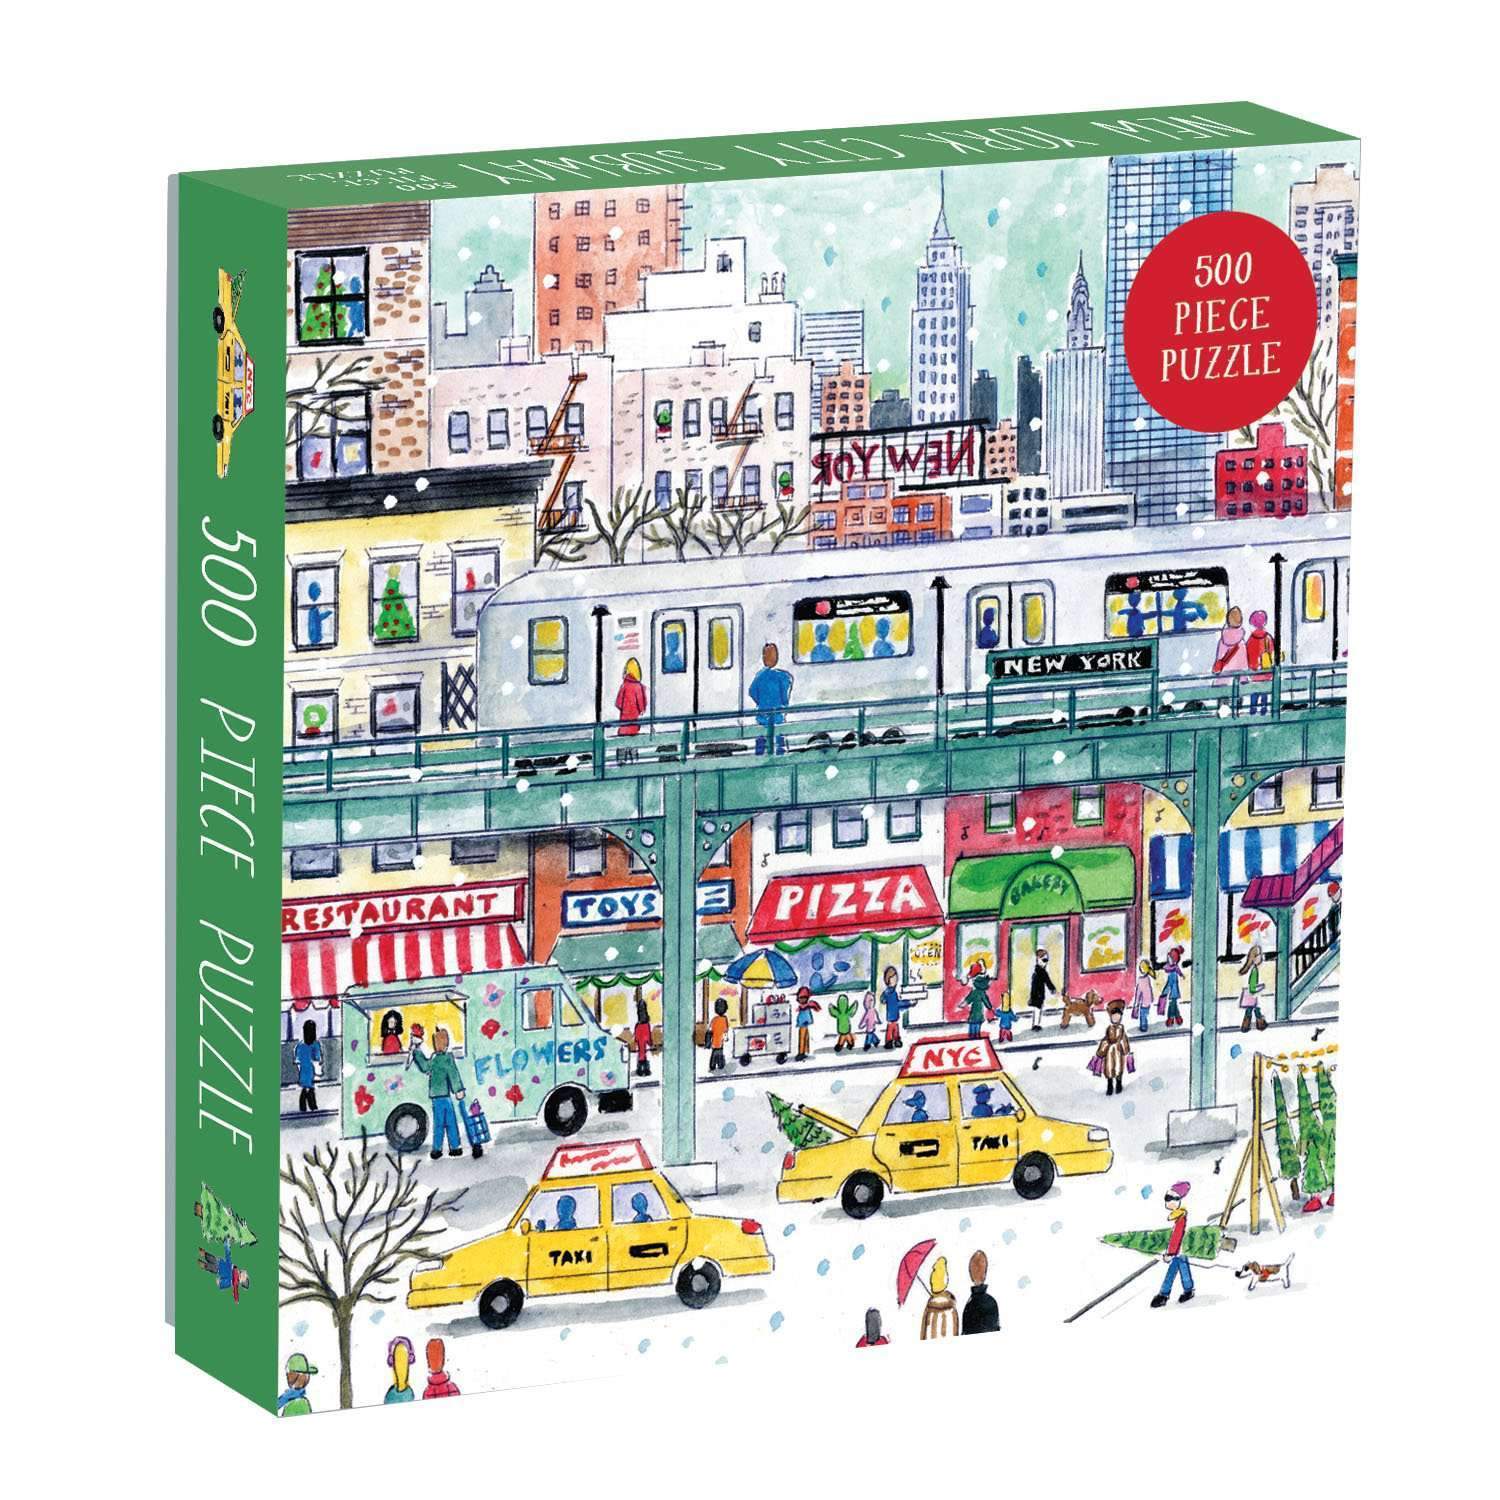 The Met Store - Just put this fabulous puzzle together. The